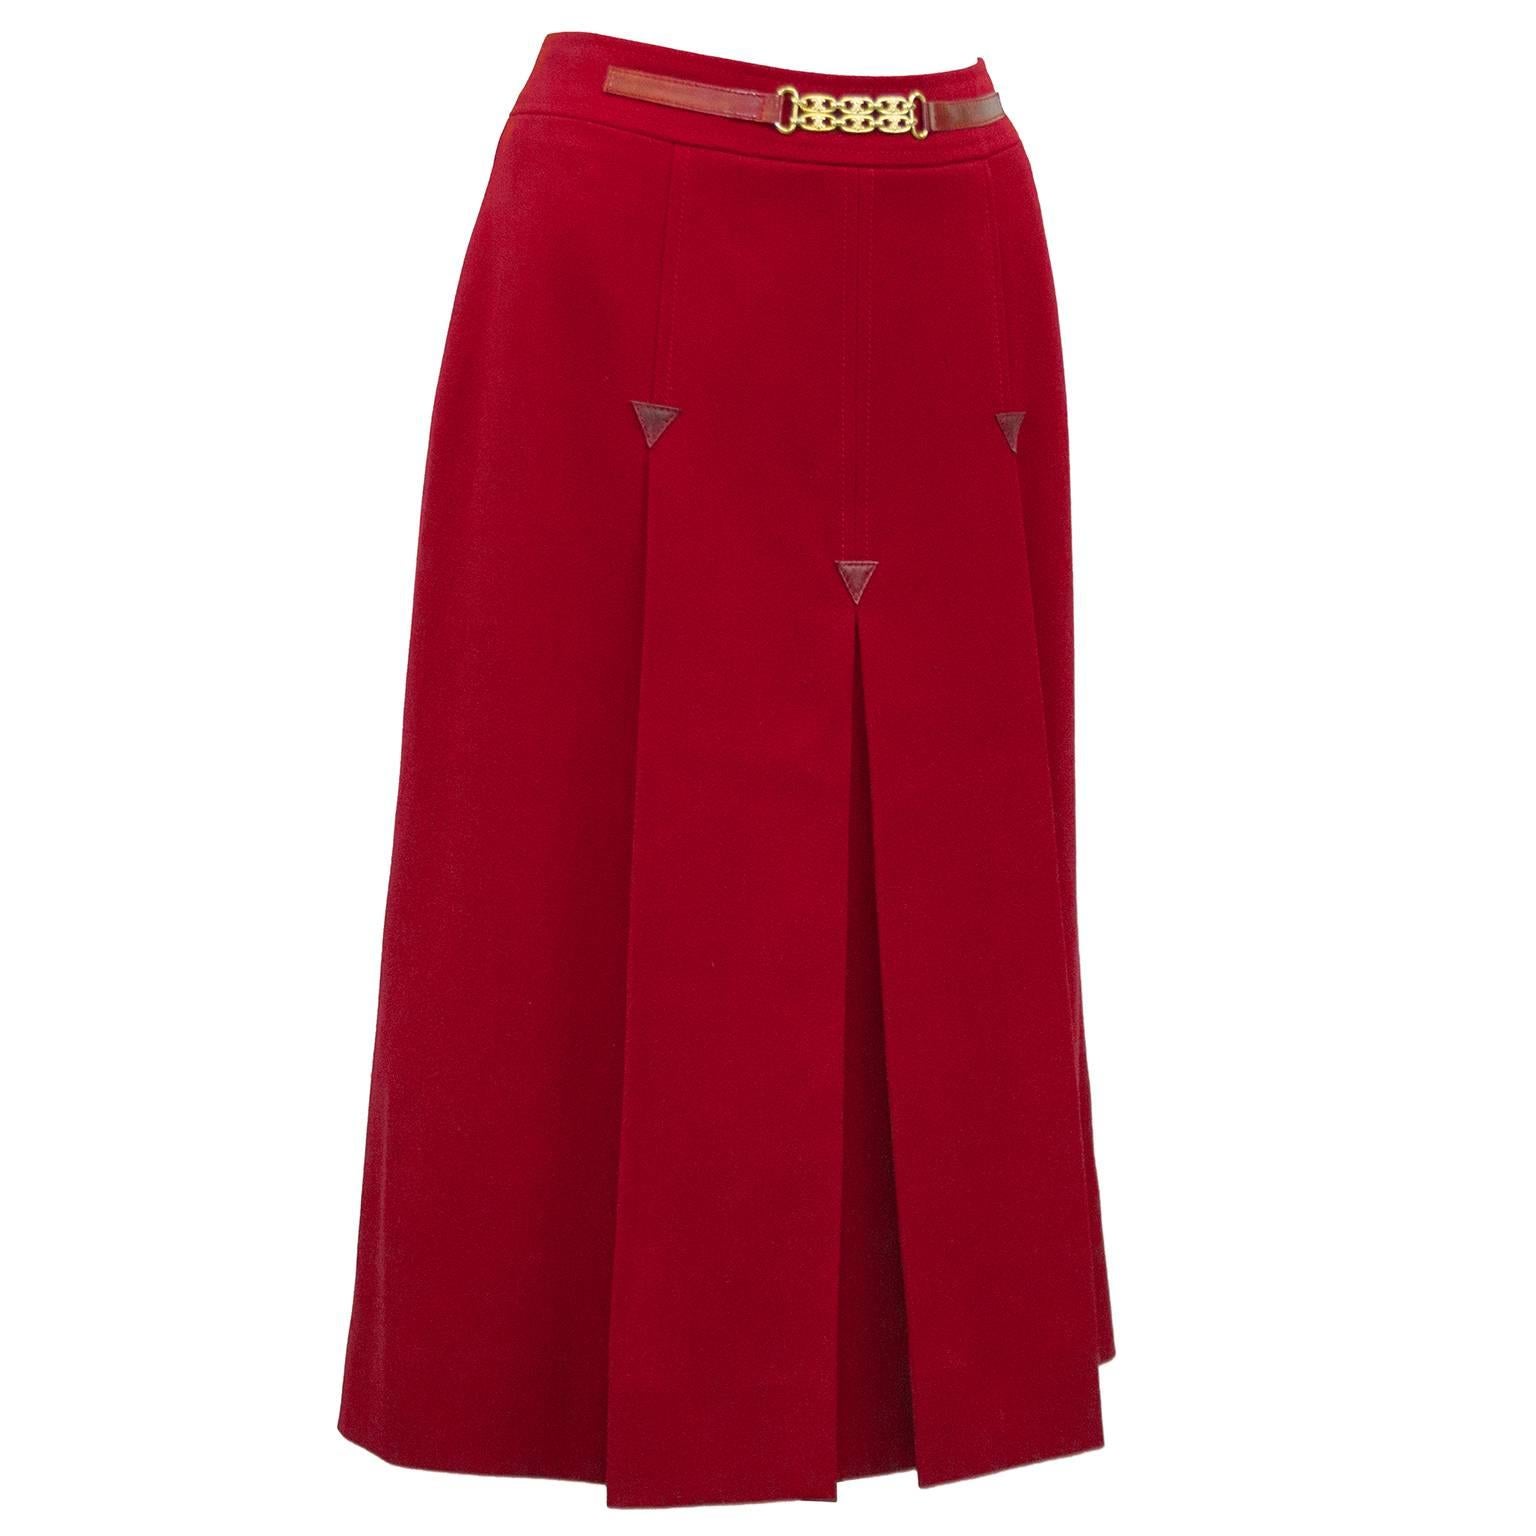 1970's Celine red wool skirt with leather details and gold link buckle. Inverted box pleats on the front and back with red leather triangle appliques. Gold link faux buckle on the waistband secured with leather tabs. Overall A line shape. In